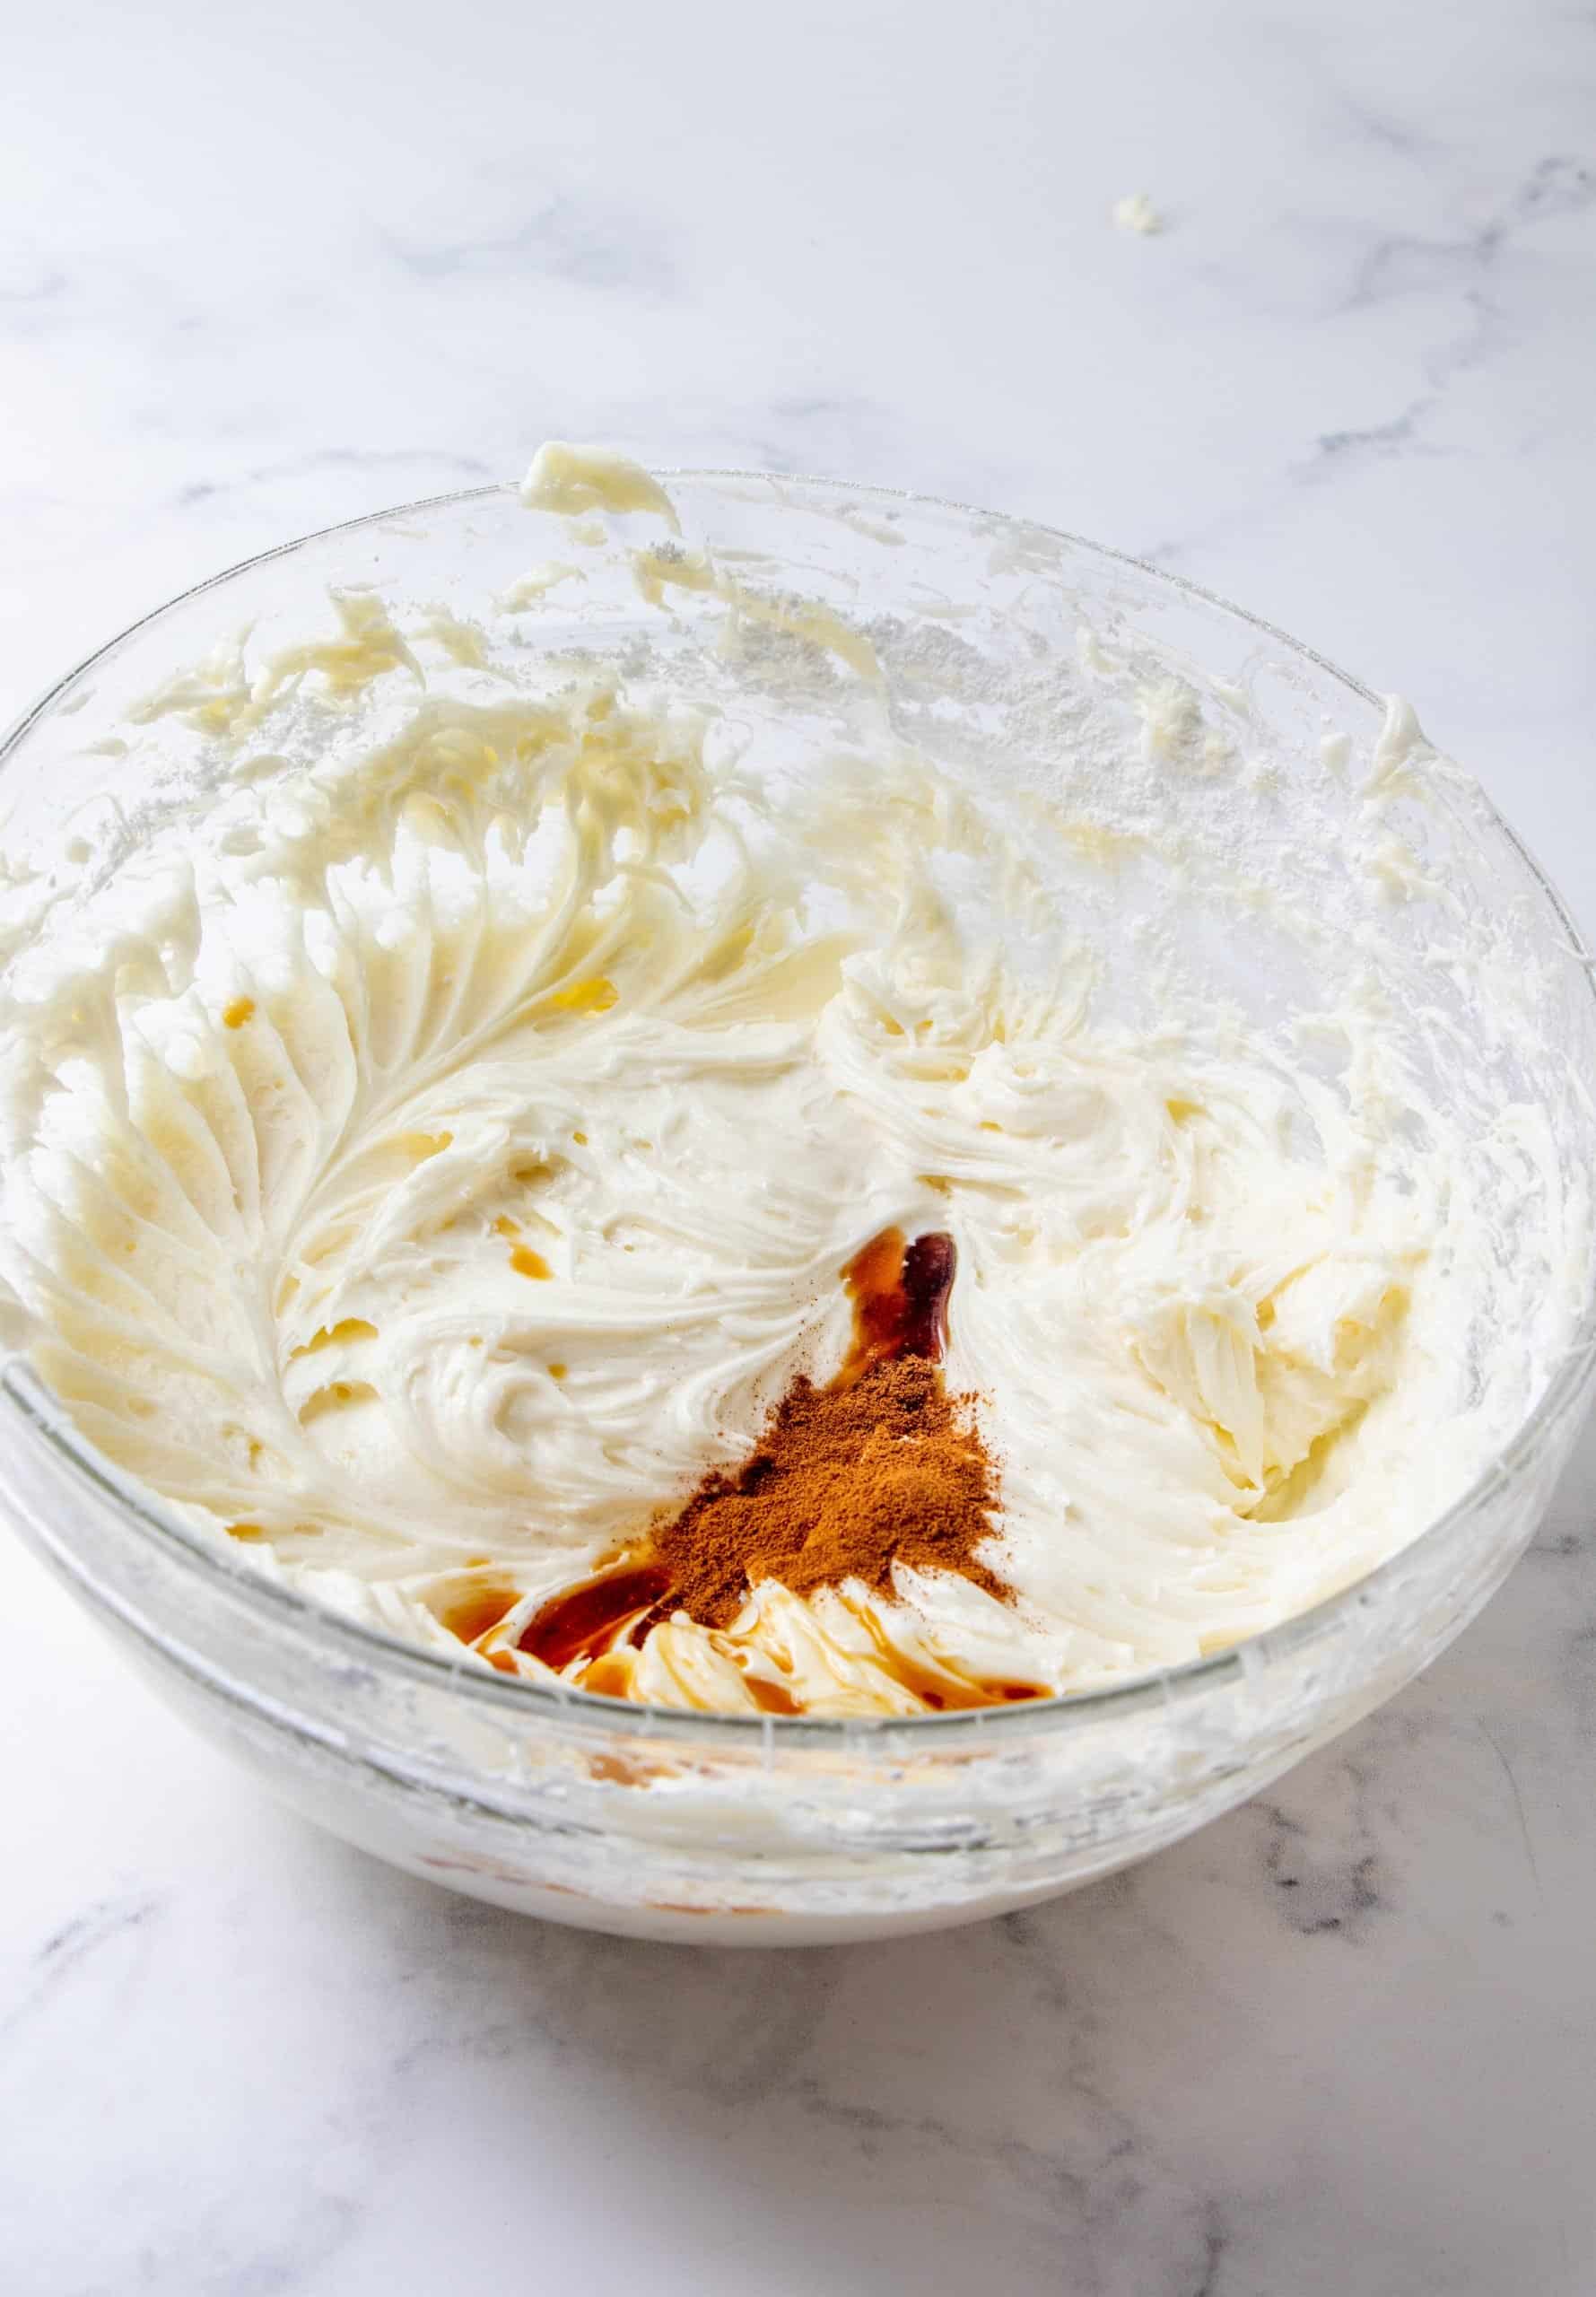 vanilla extract and pumpkin spice added to cream cheese mixture.